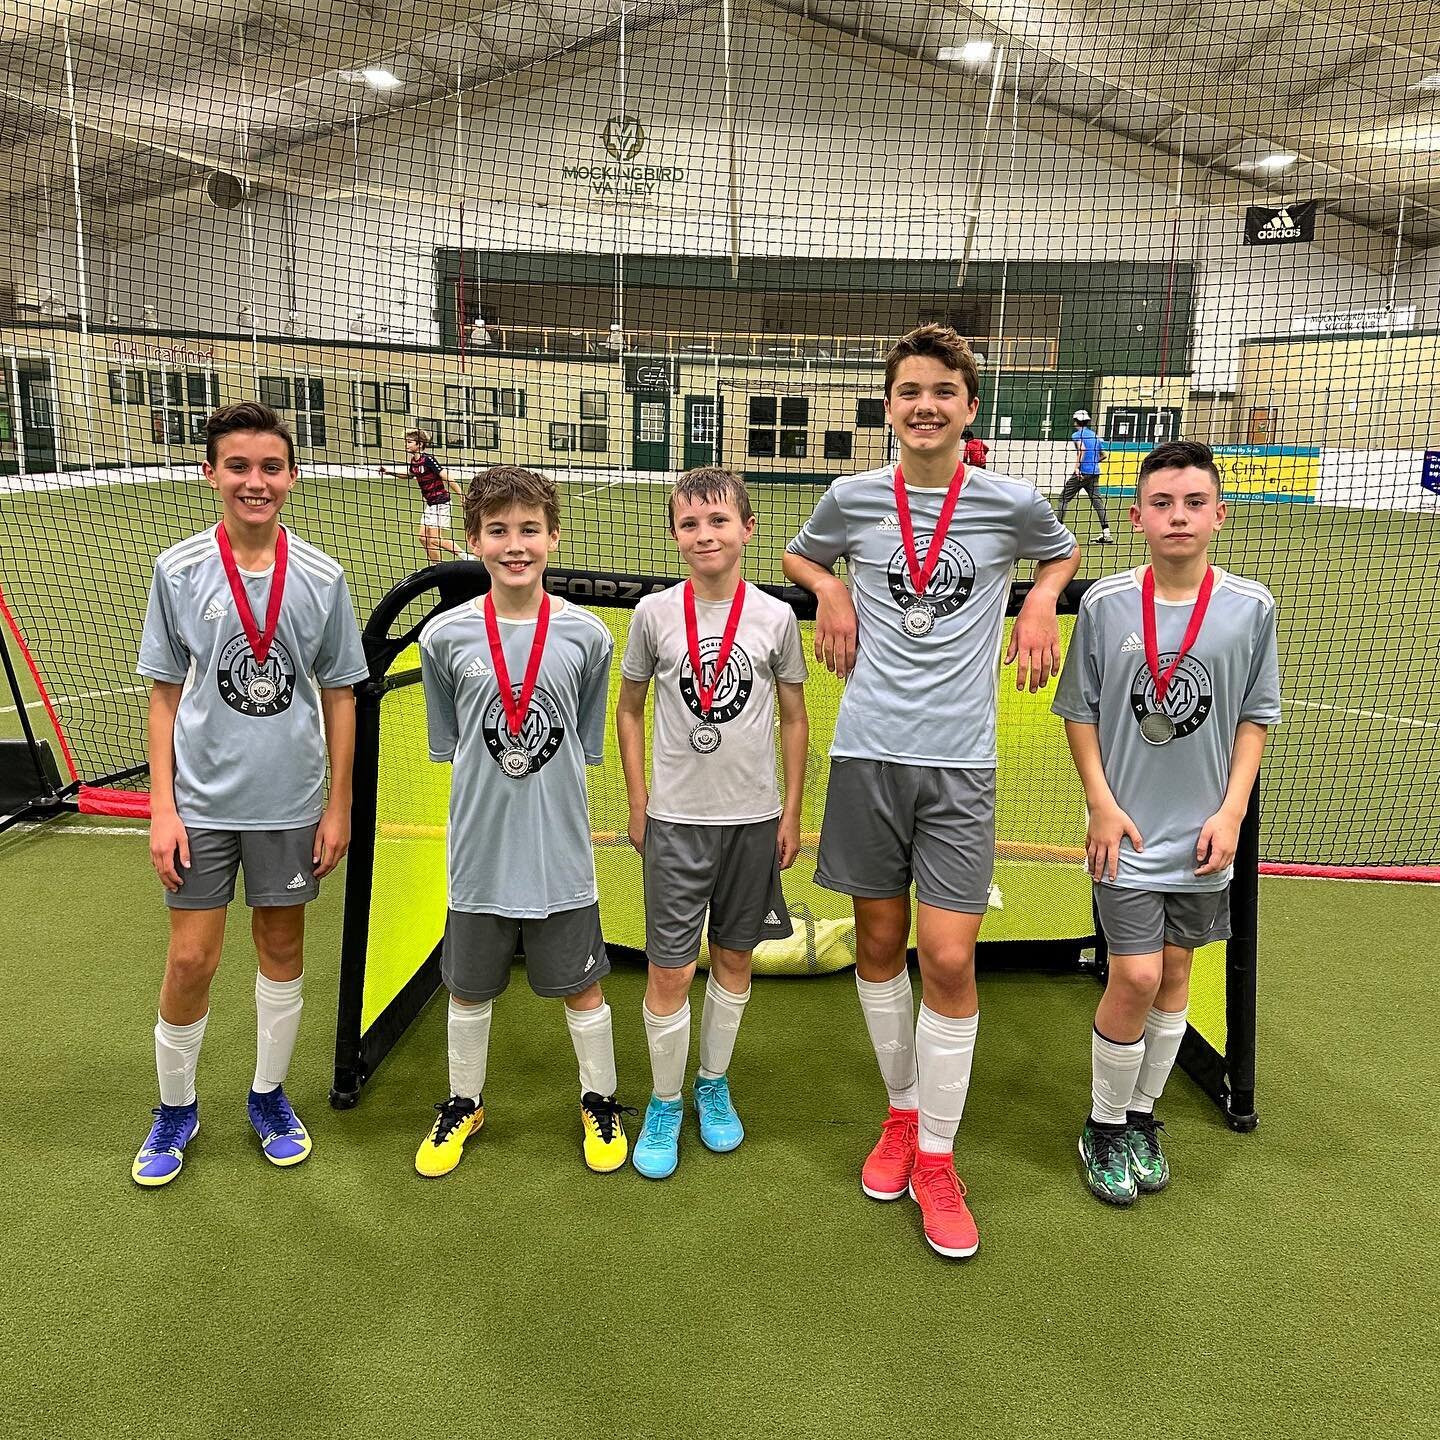 Congratulations to Germany who were Finalists of our annual Black Friday 4v4 Inner Club Tournament in our 2009-2010 age division! #mvpremier #thegoldstandard